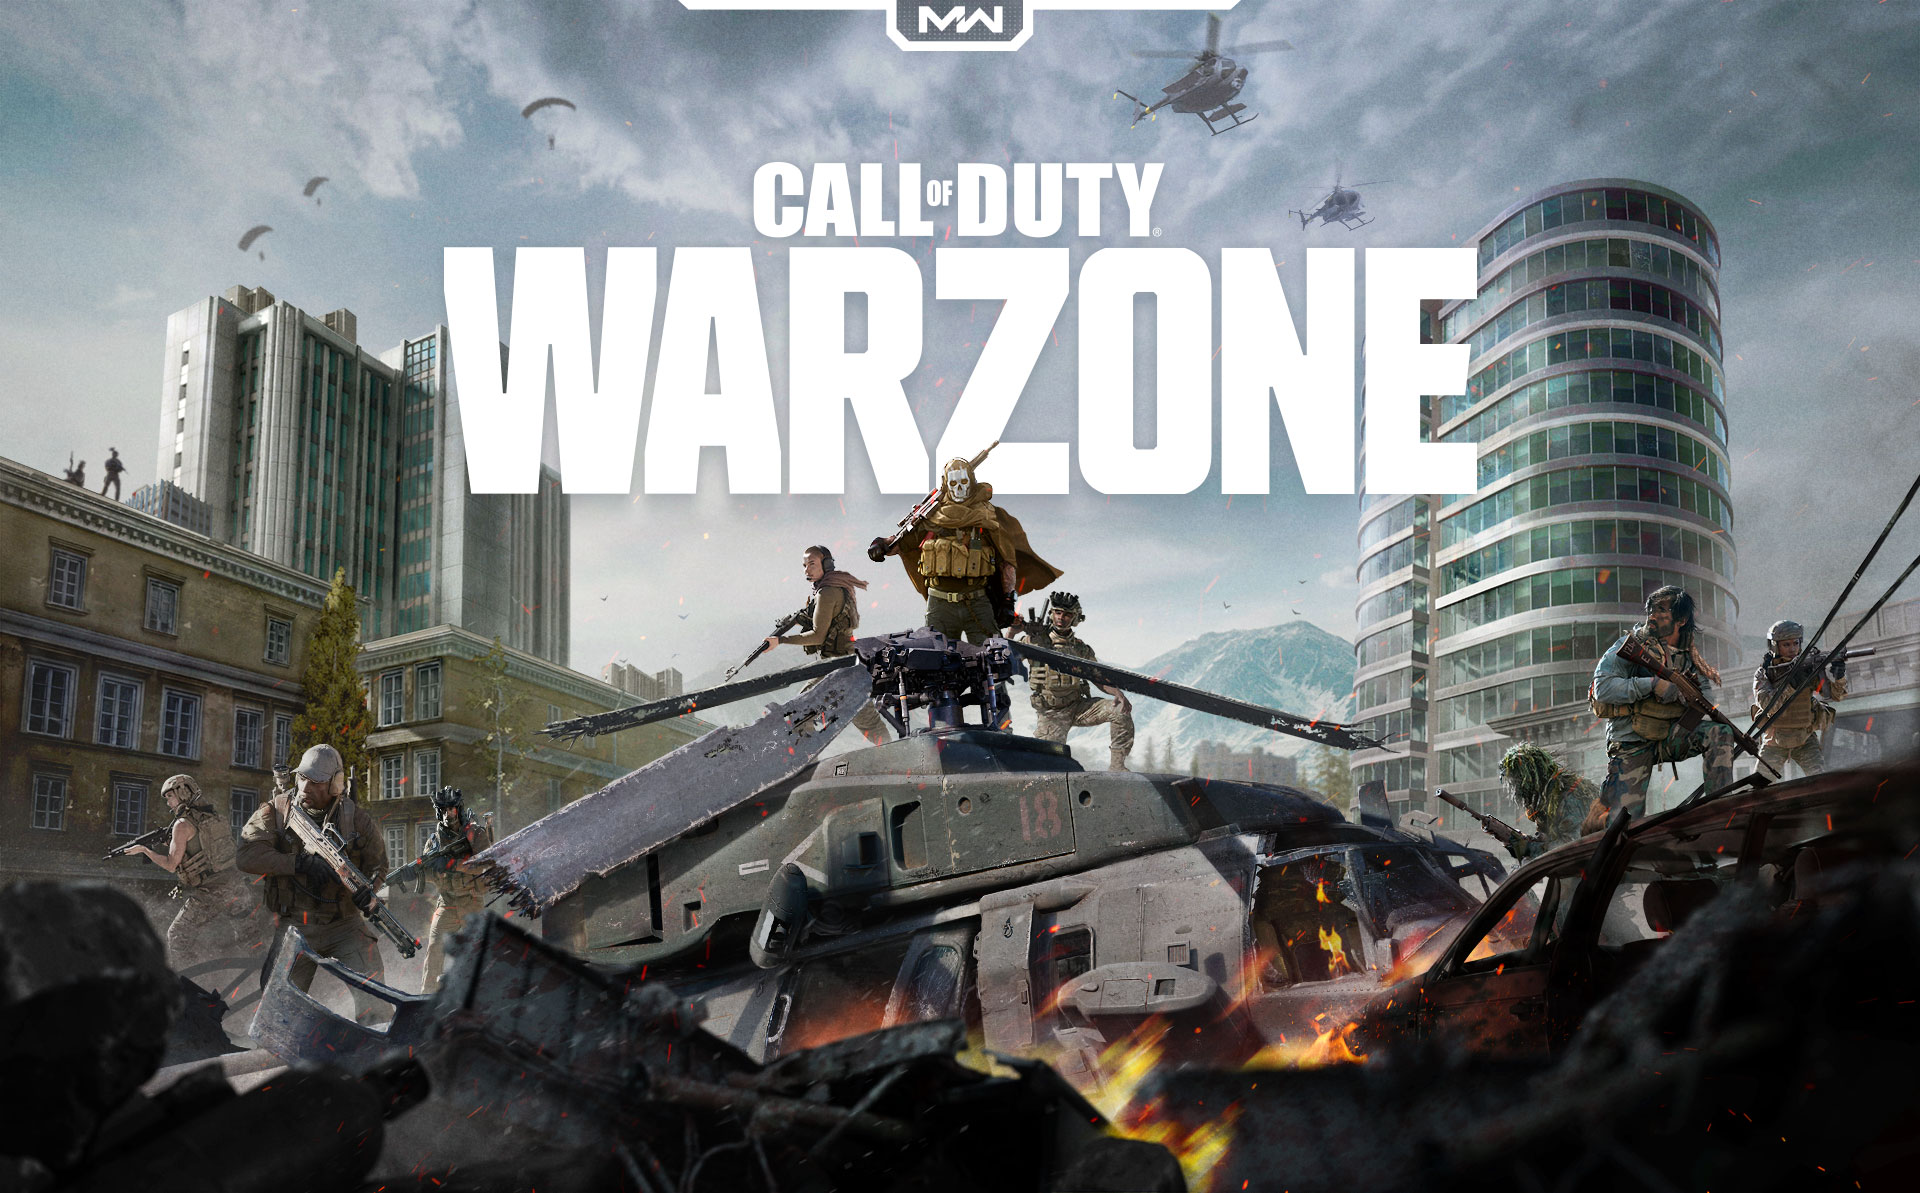 Call of Duty warzone, GamersRD